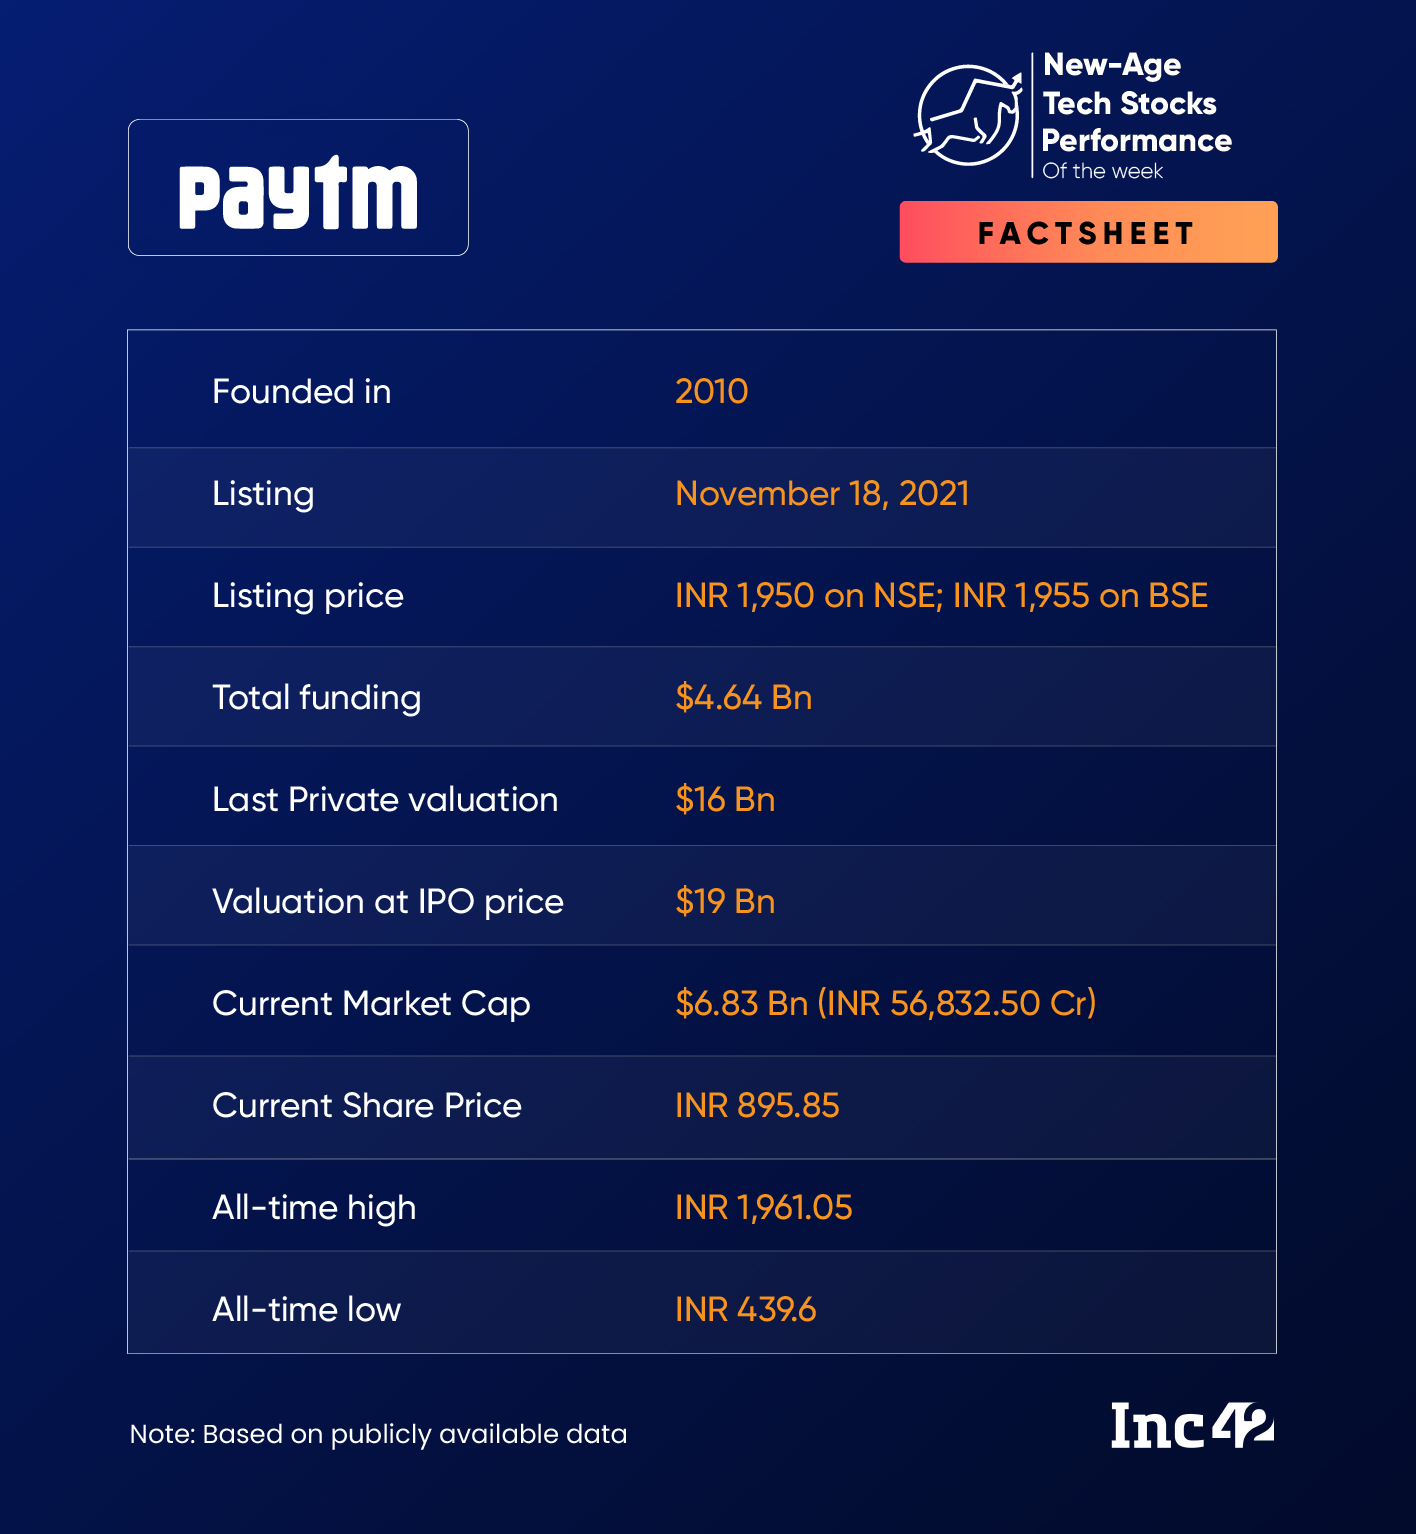 Shares of Paytm fell 9.27% this week, as the stock’s bull run ended amid the bloodbath at Dalal Street.